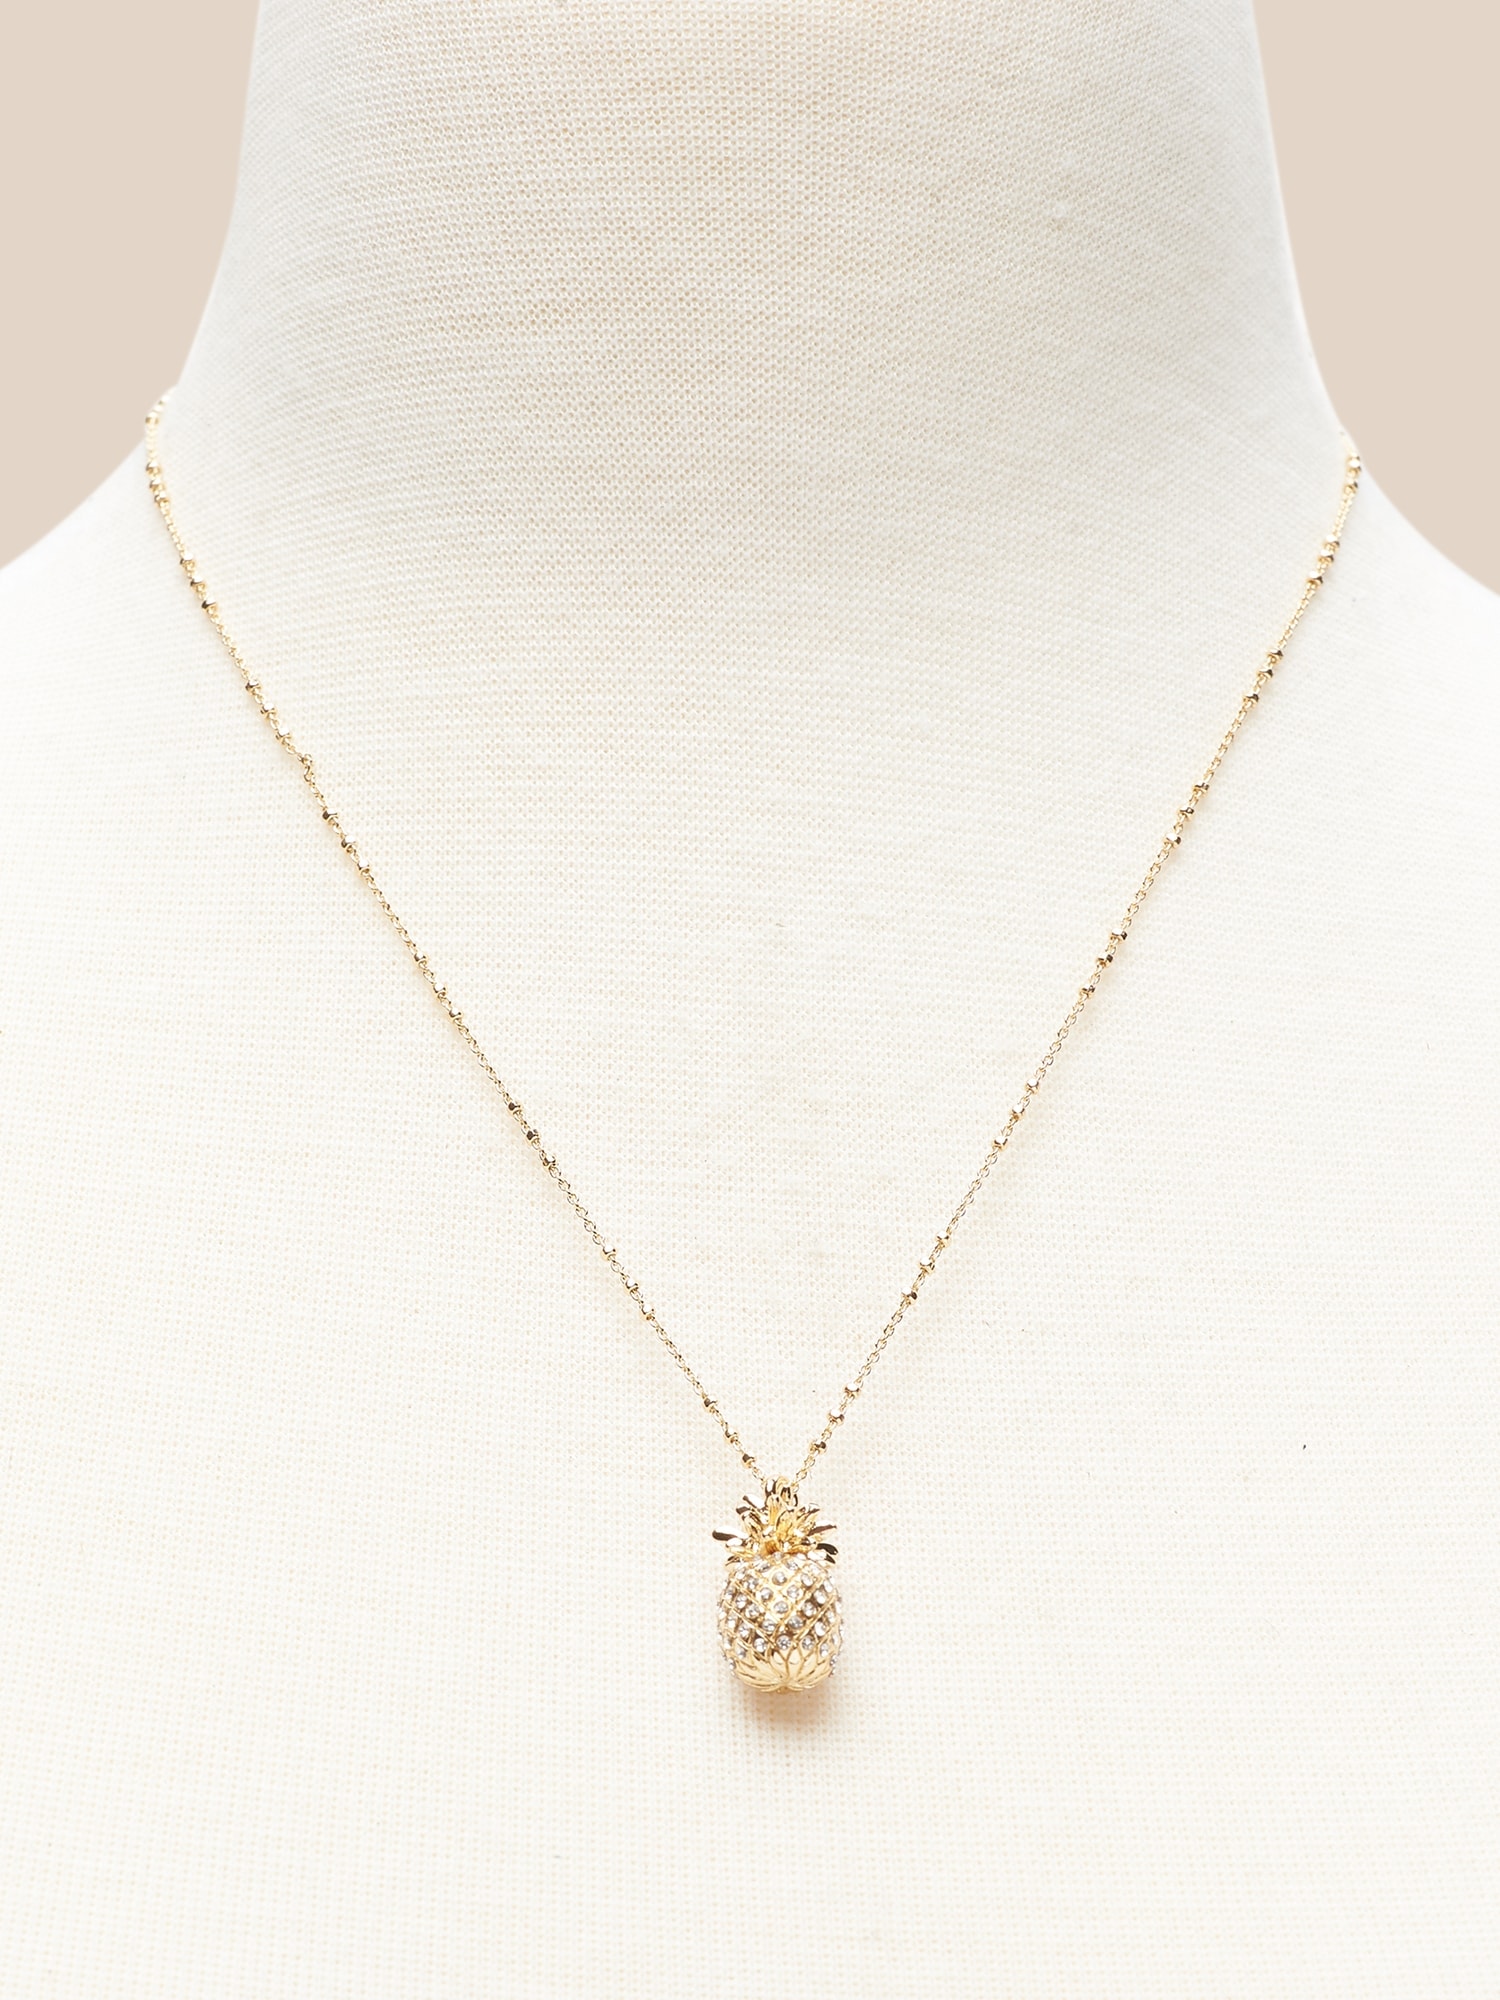 Pineapple Delicate Necklace